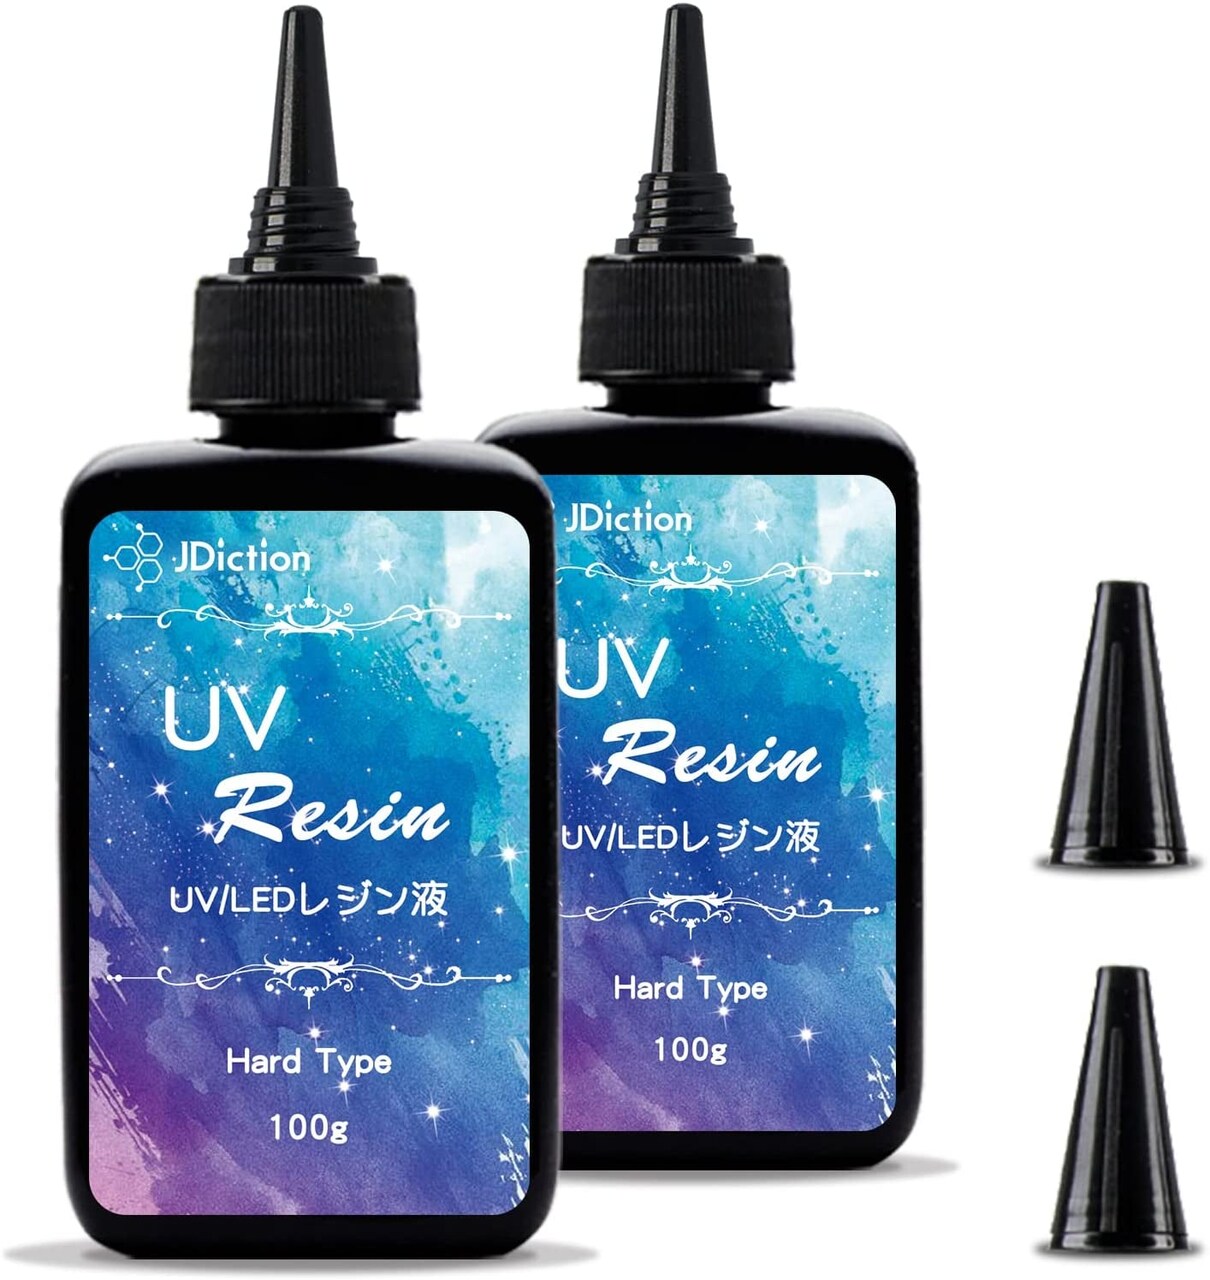 UV Resin, 500G Upgrade Ultraviolet Epoxy Resin Crystal Clear Hard Glue  Solar Cure Sunlight Activated Resin Kit for Handmade Jewelry, DIY Craft